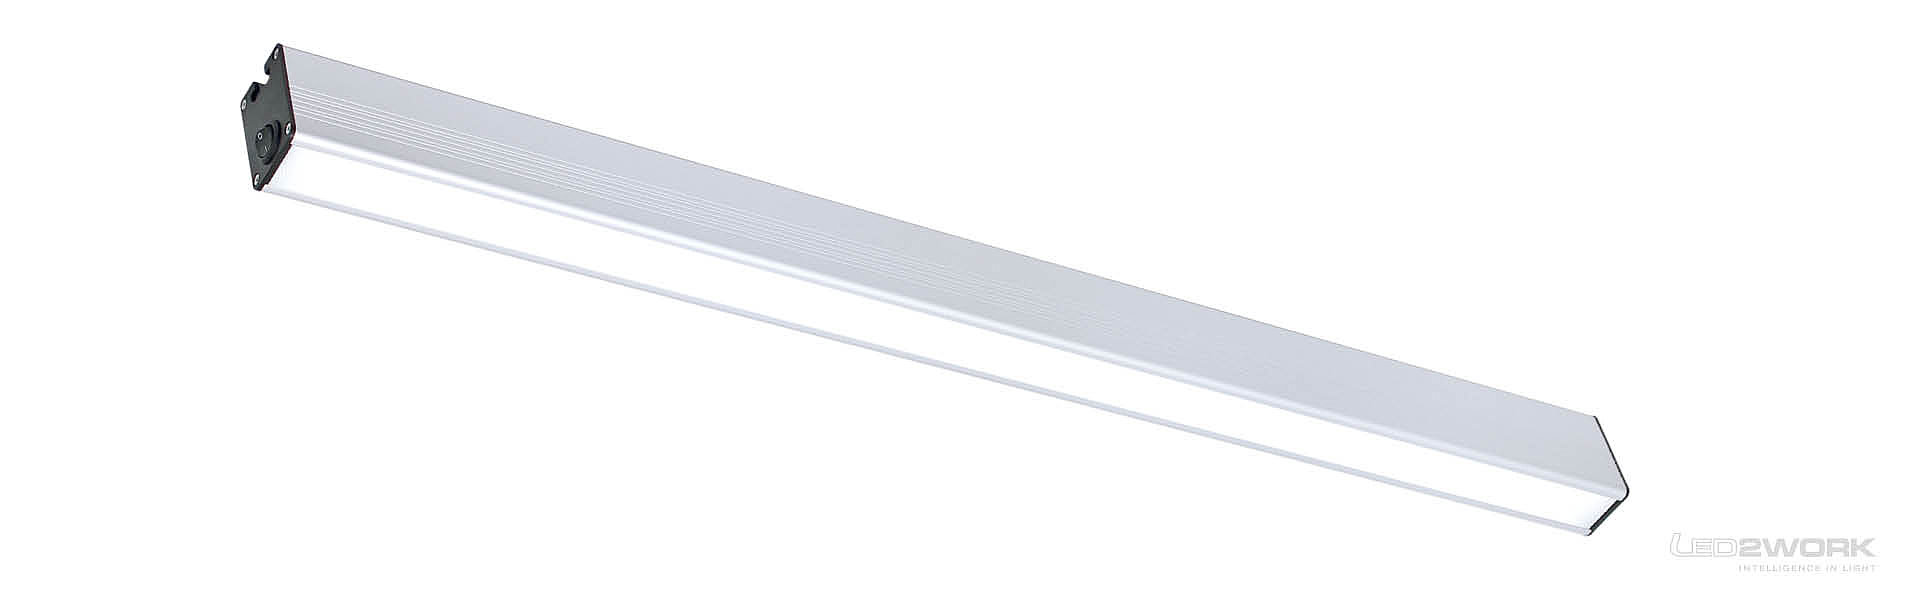 Picture of LED profile light | LED workbench light | PROFILED from LED2WORK